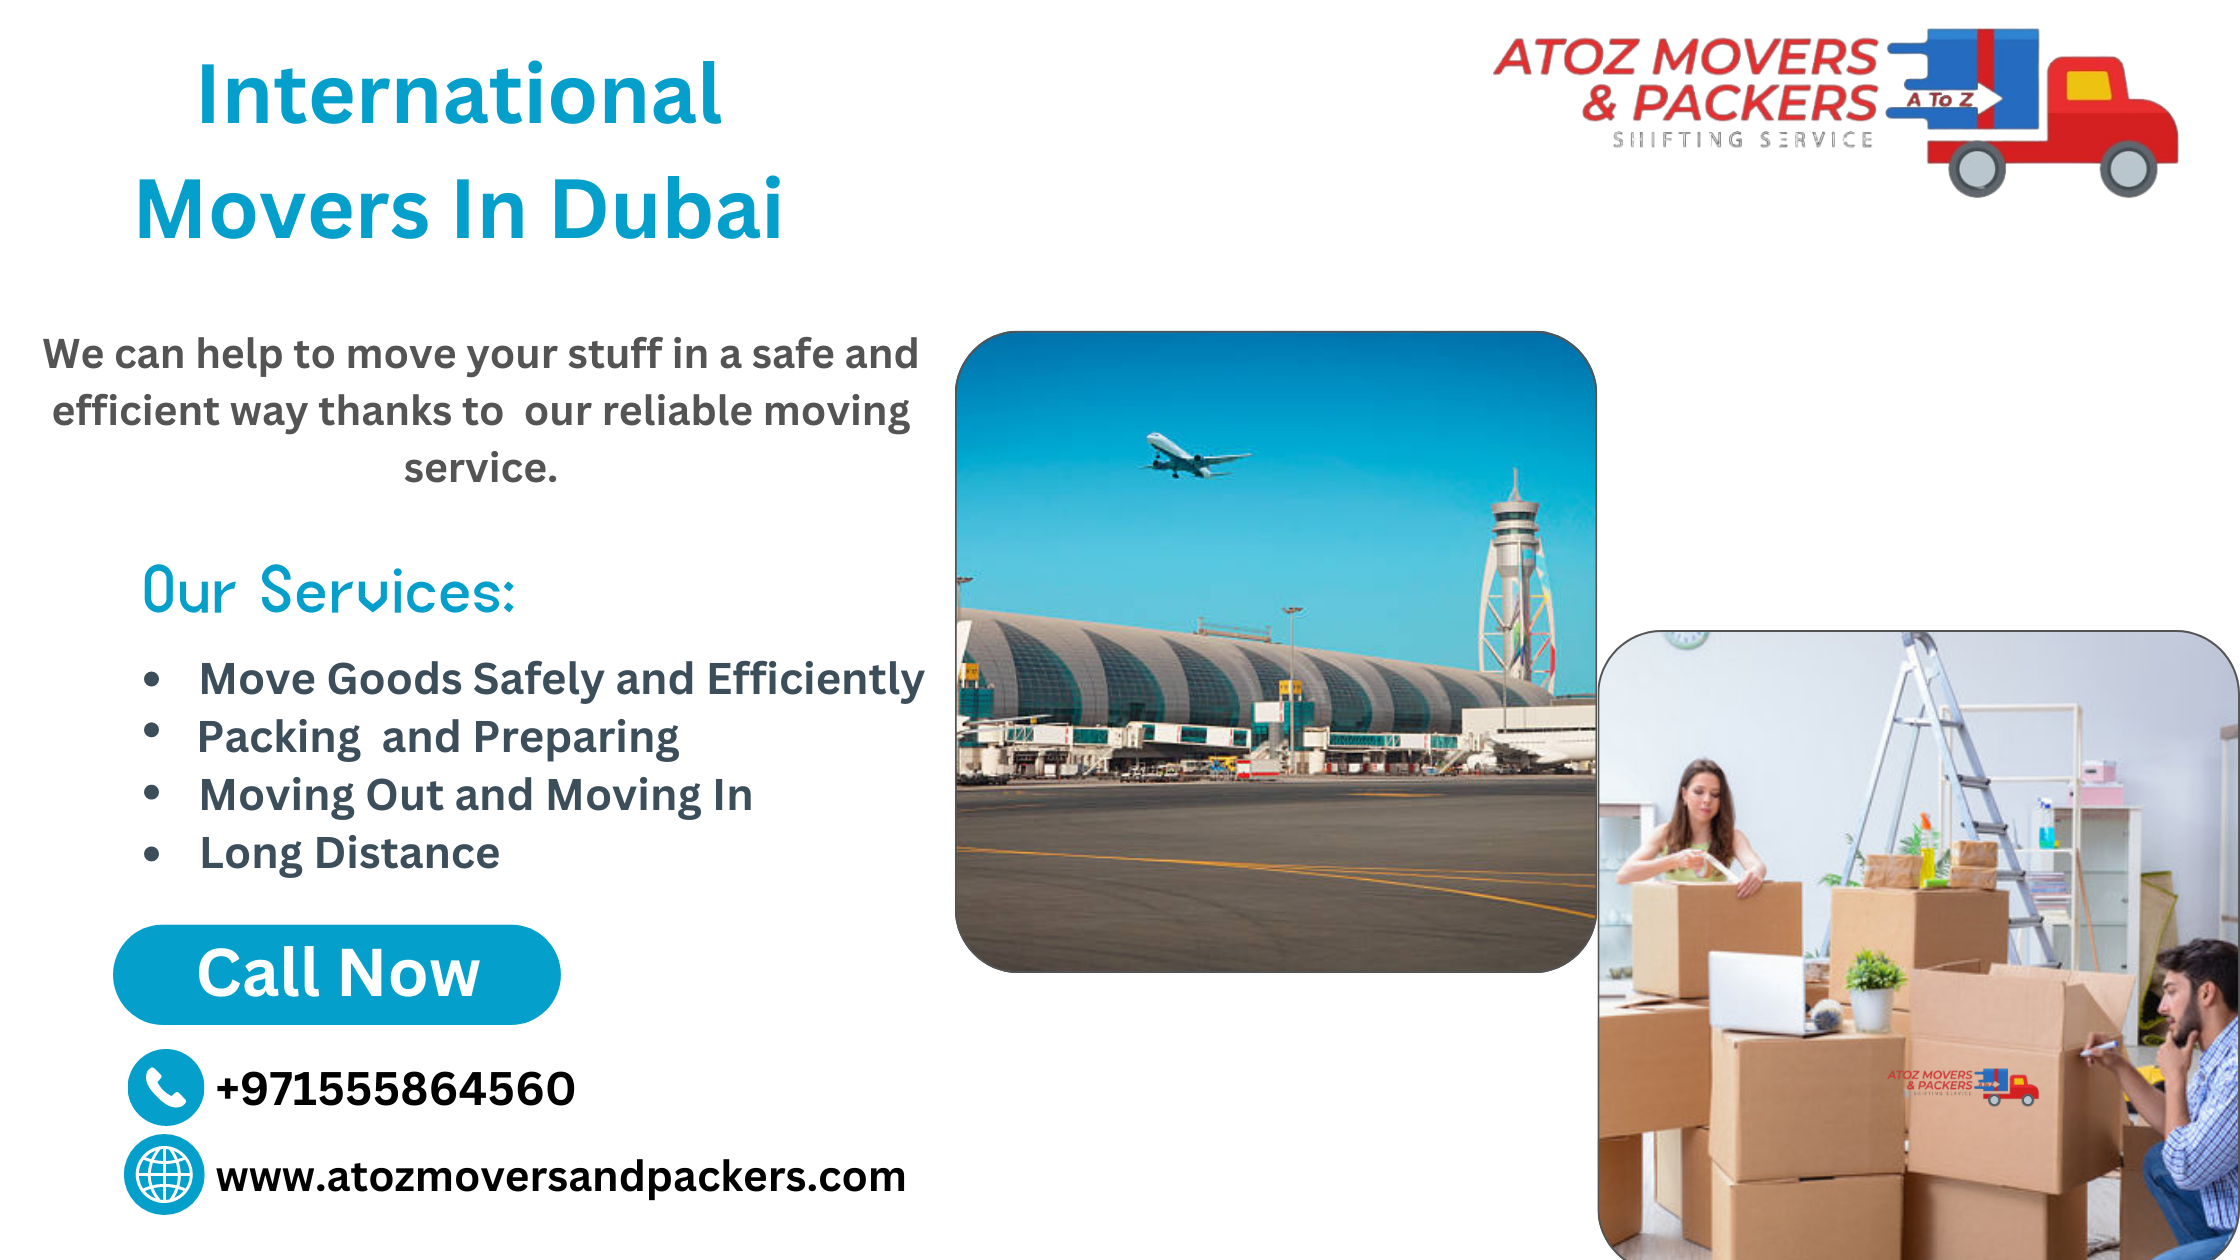 international movers and packers in dubai